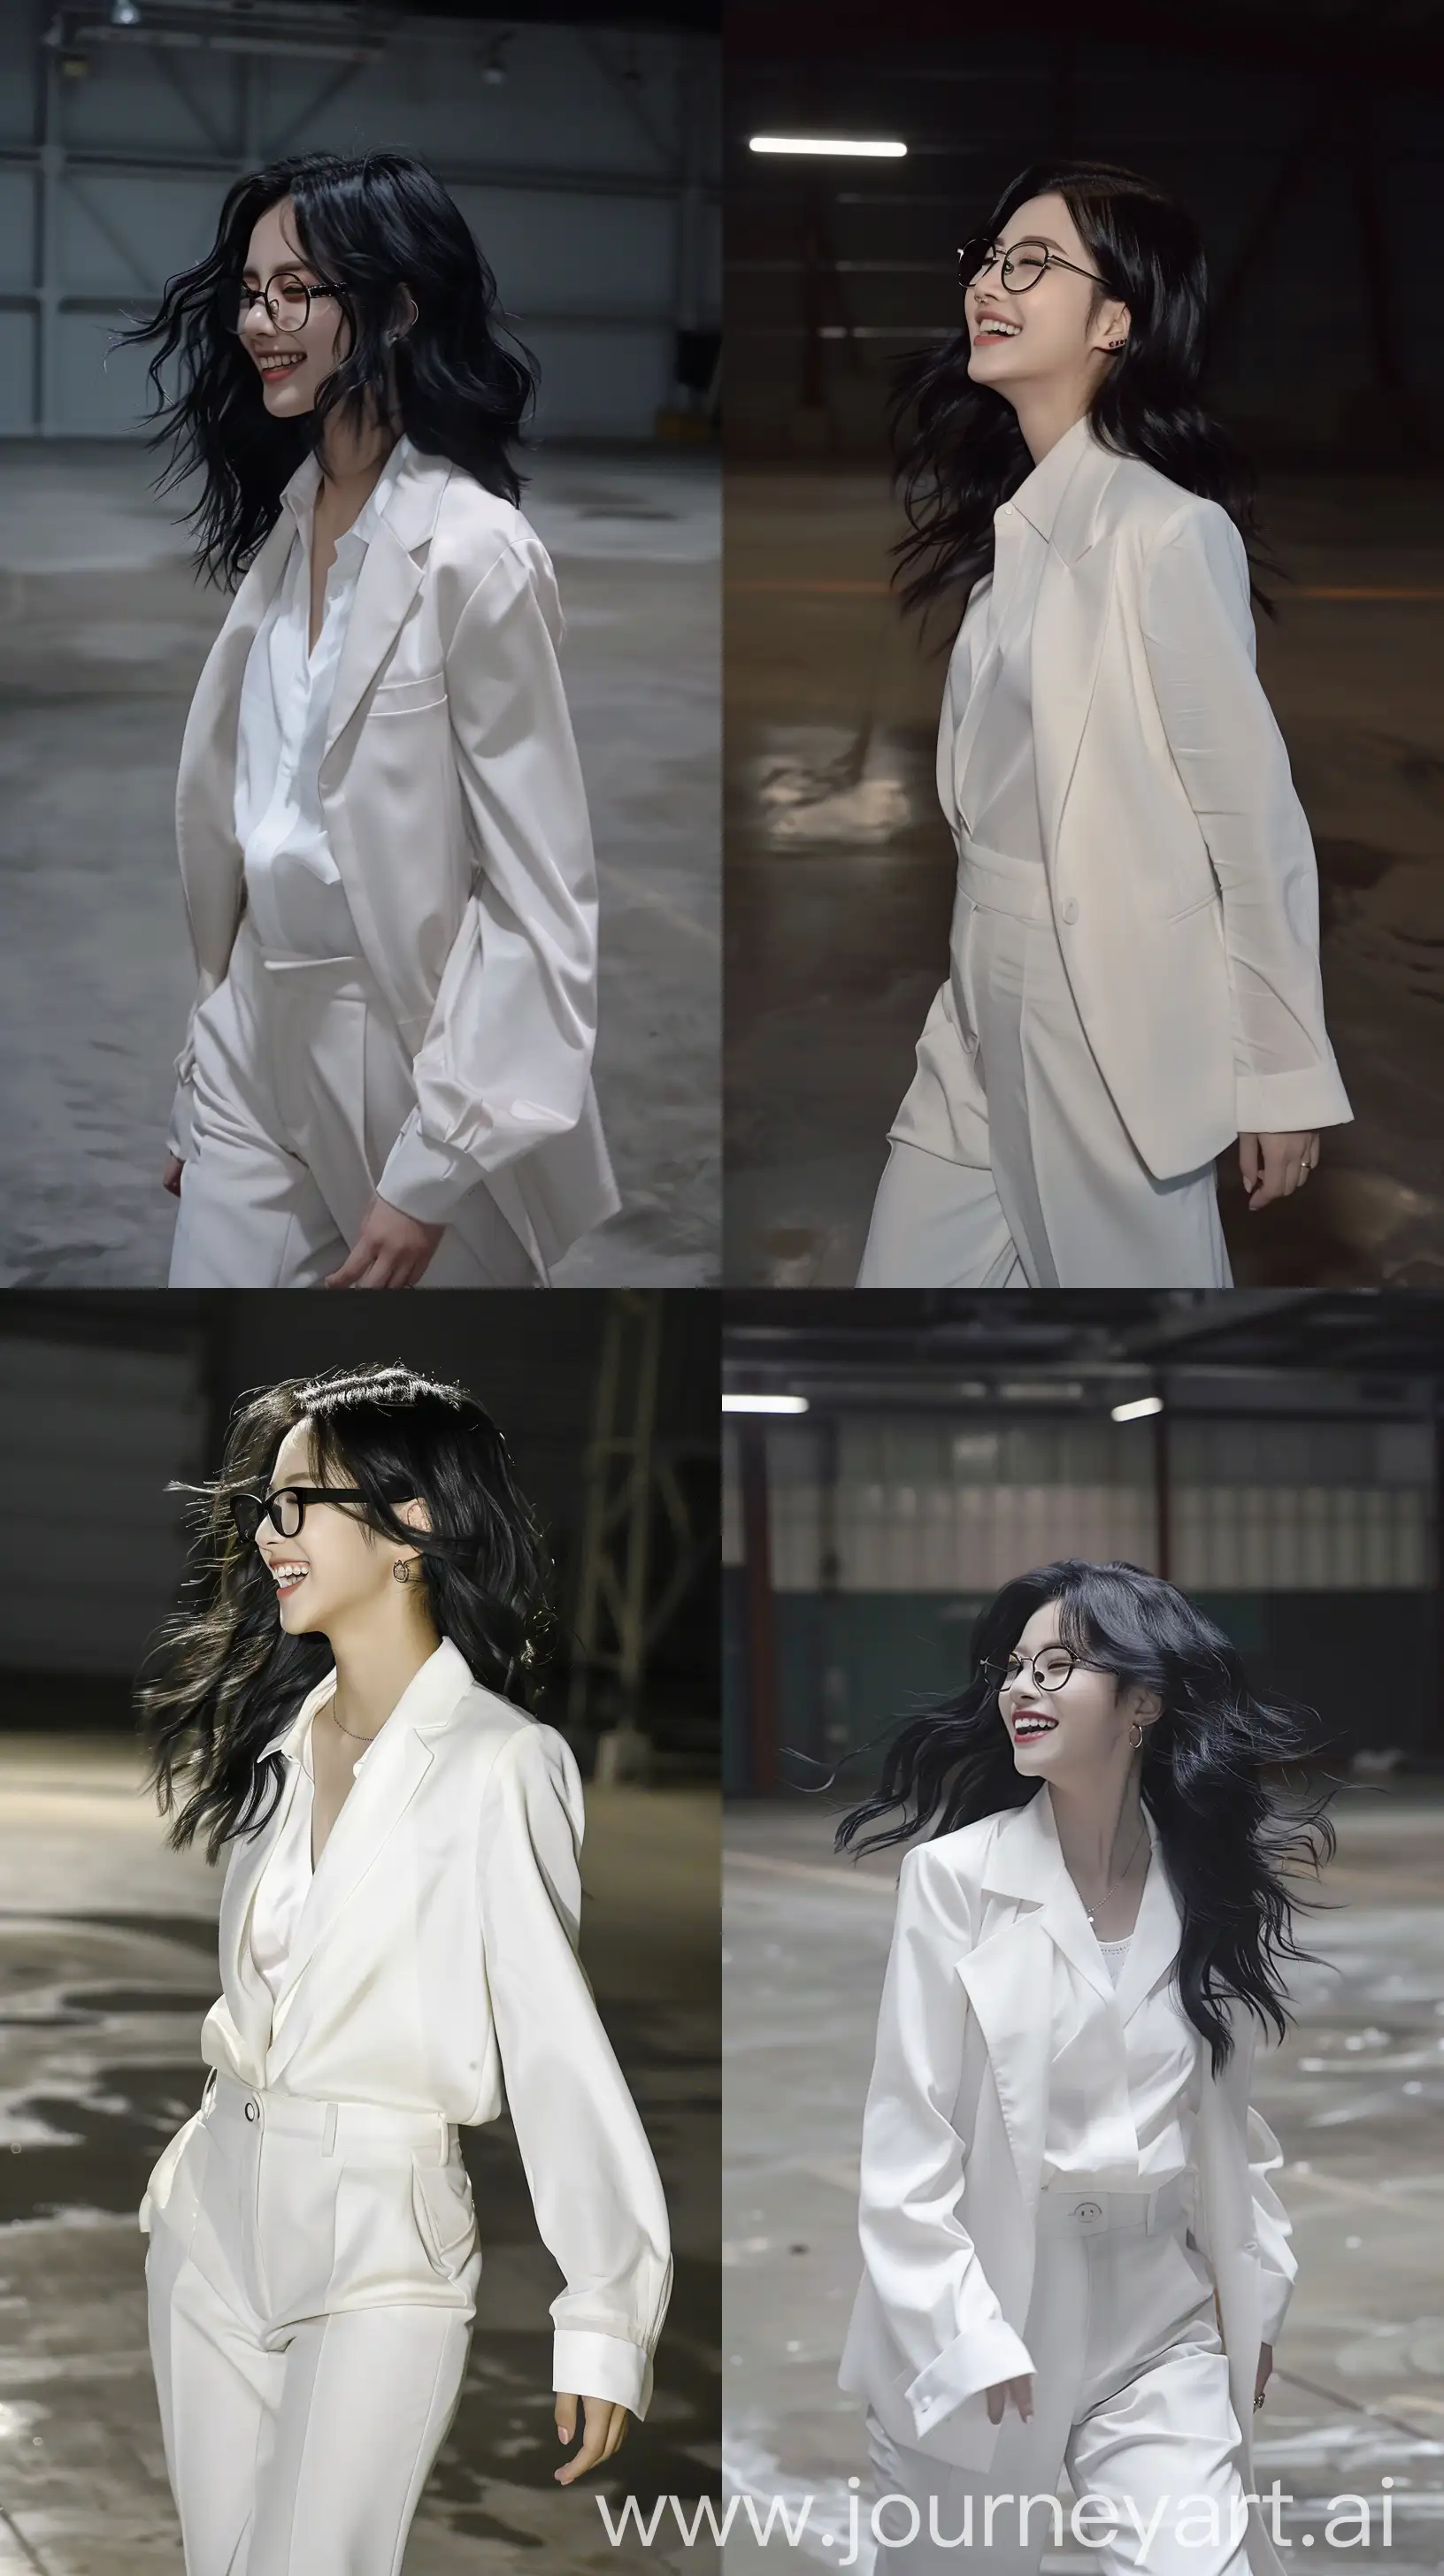 aestethic selfie, blackpink's jennie,black wolfcut hair, wavy, wearing white simple blouse and 
suit pants, walking on empty room night time, smile, profile , black frame glasses, throw face away --ar 9:16